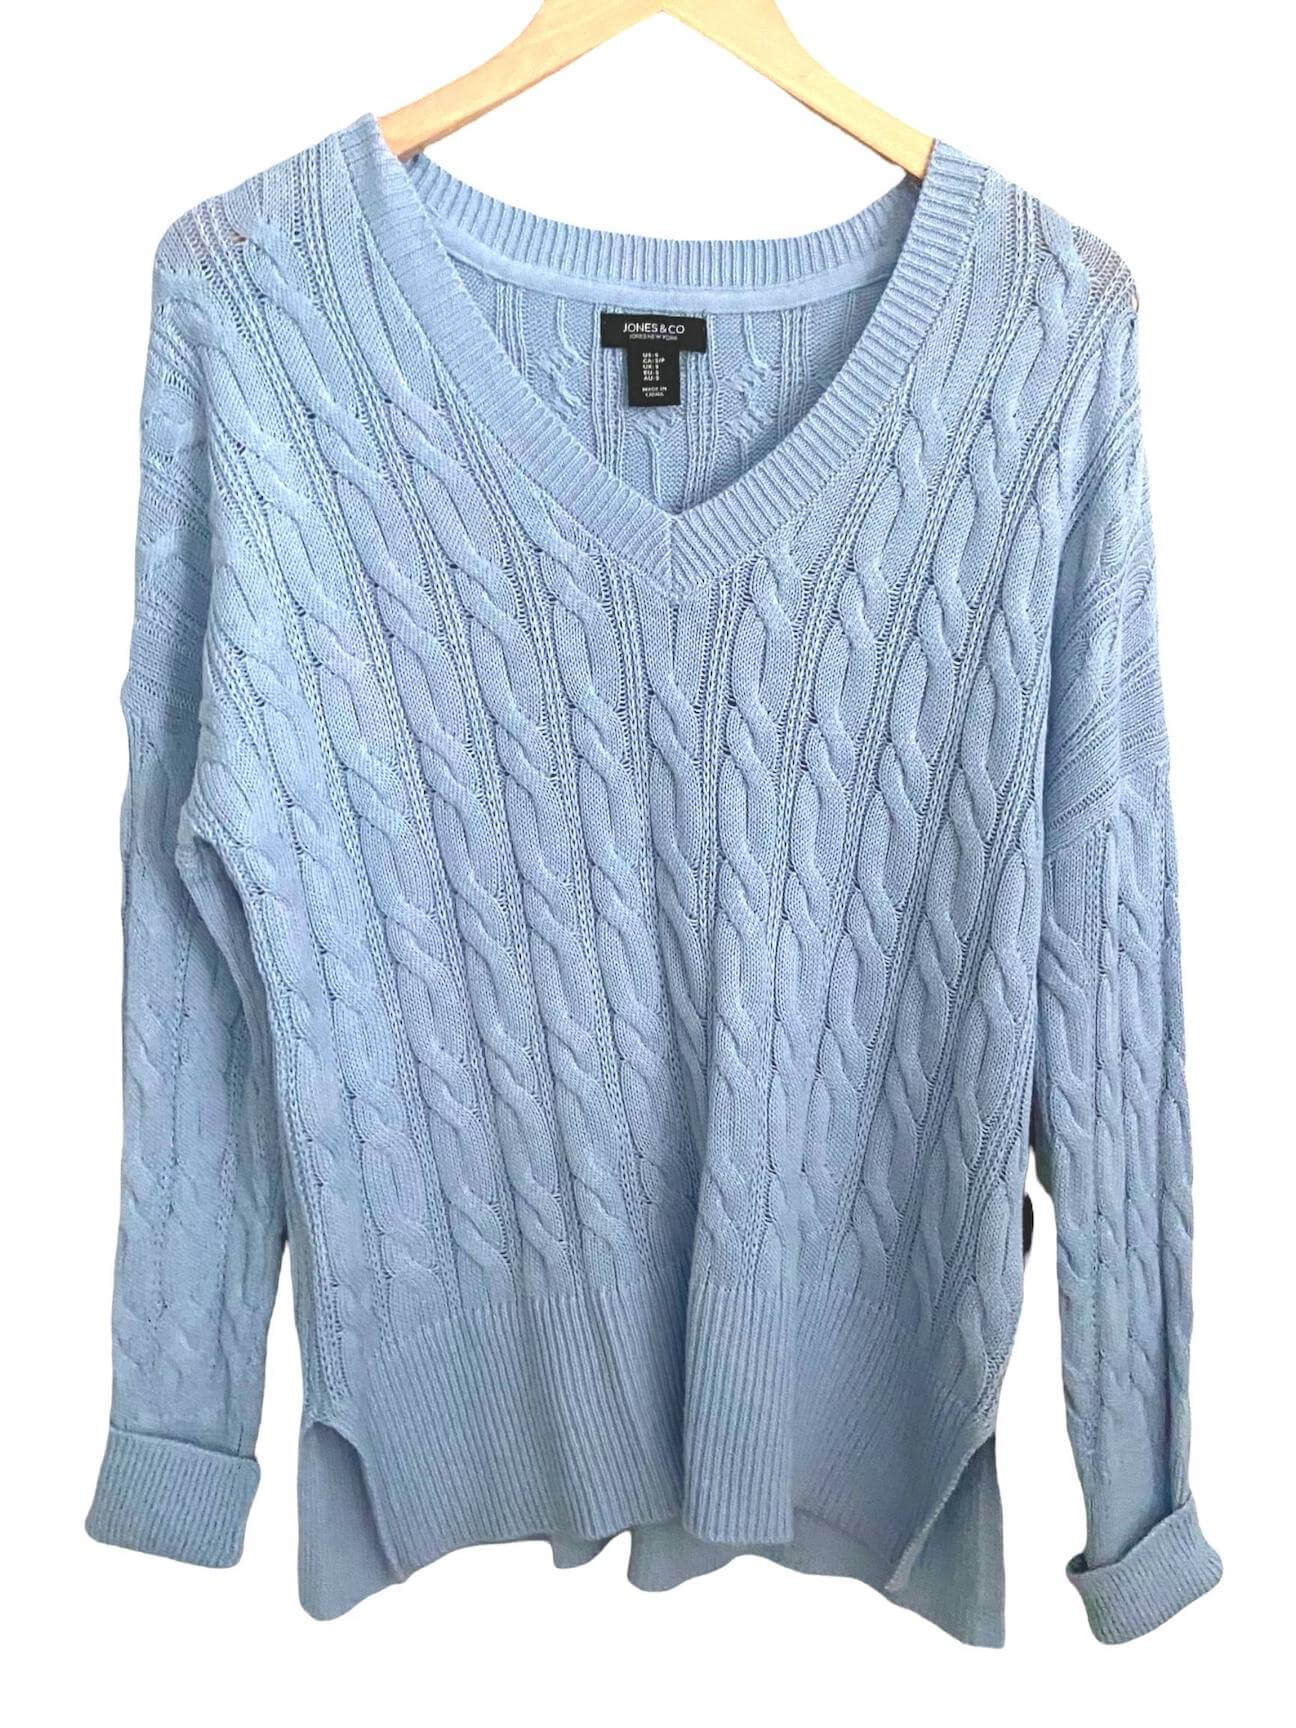 Soft Summer JONES & CO blue cable knit sweater